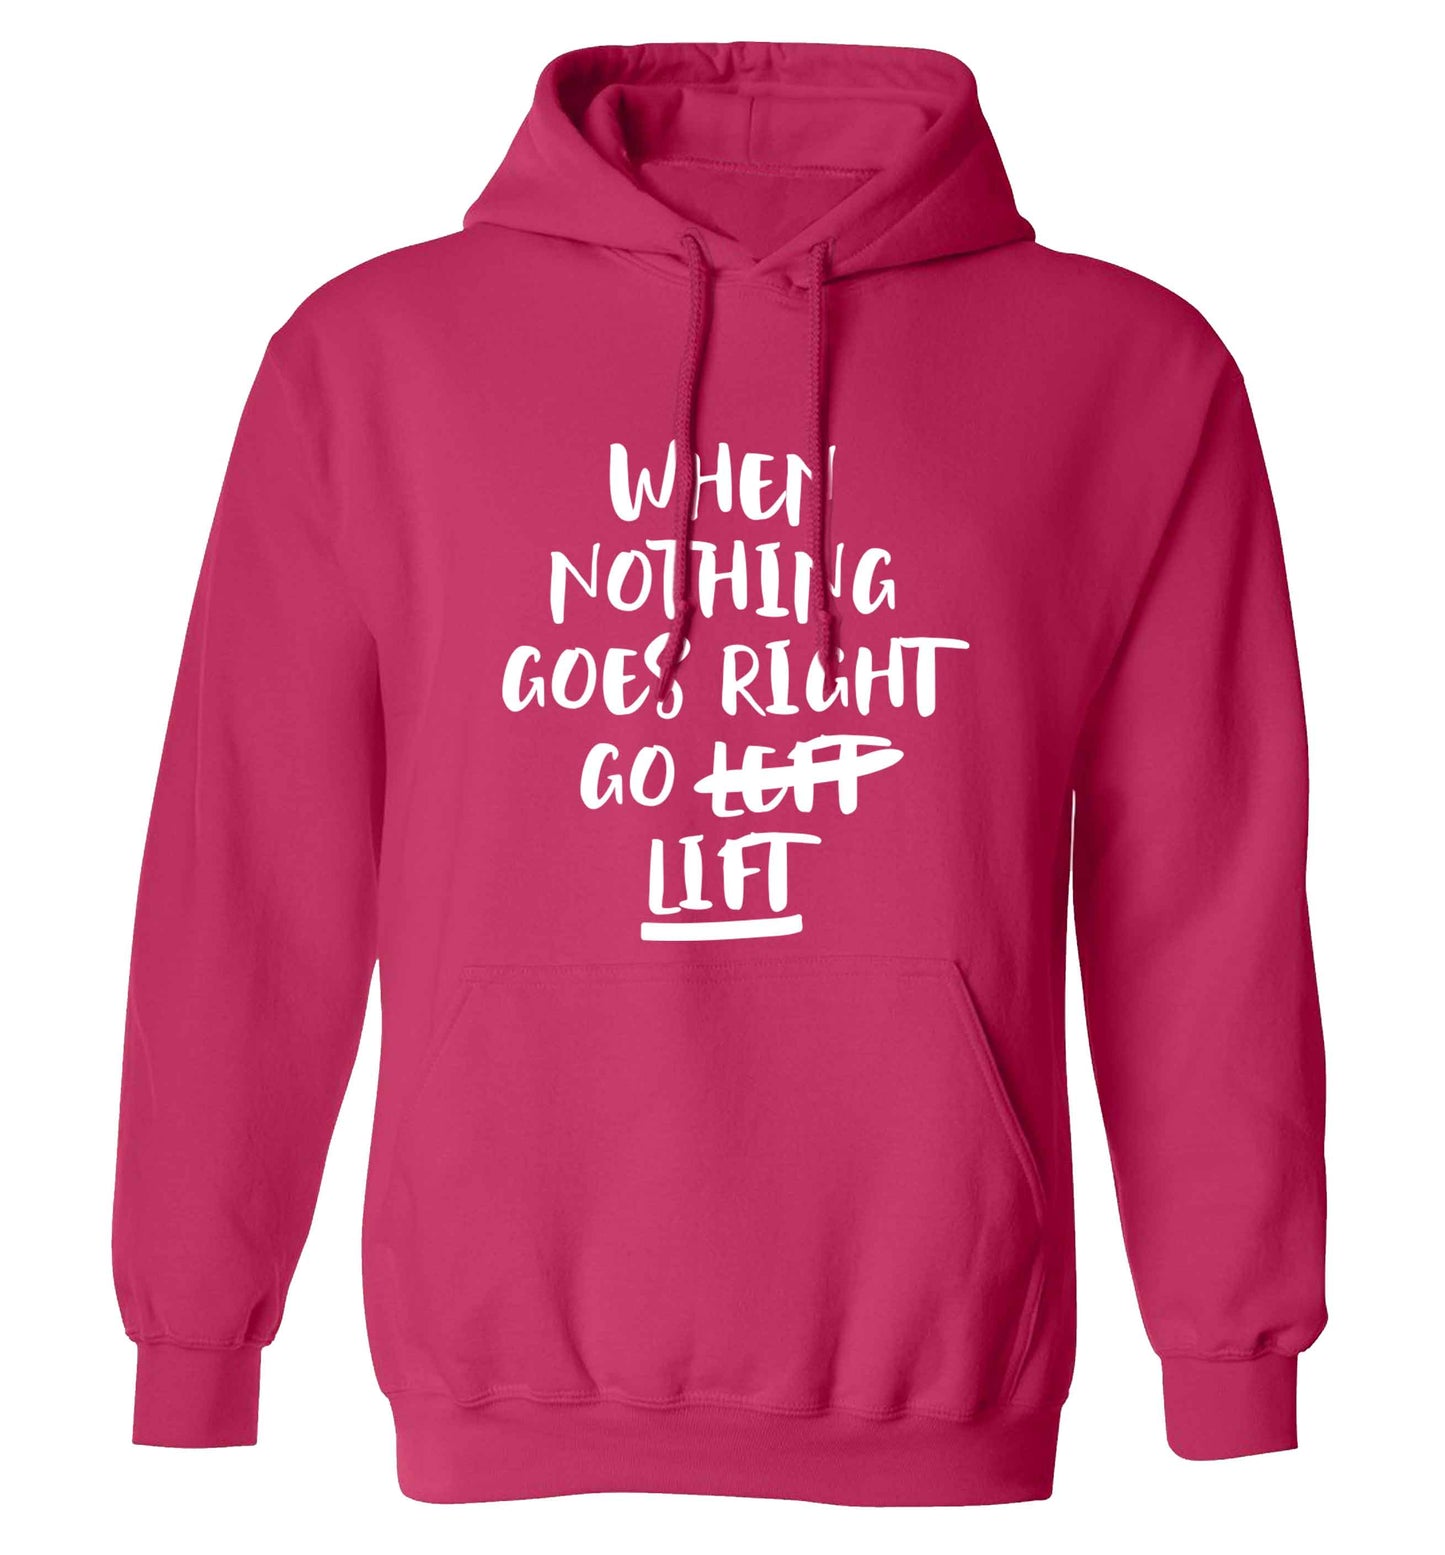 When nothing goes right go lift adults unisex pink hoodie 2XL